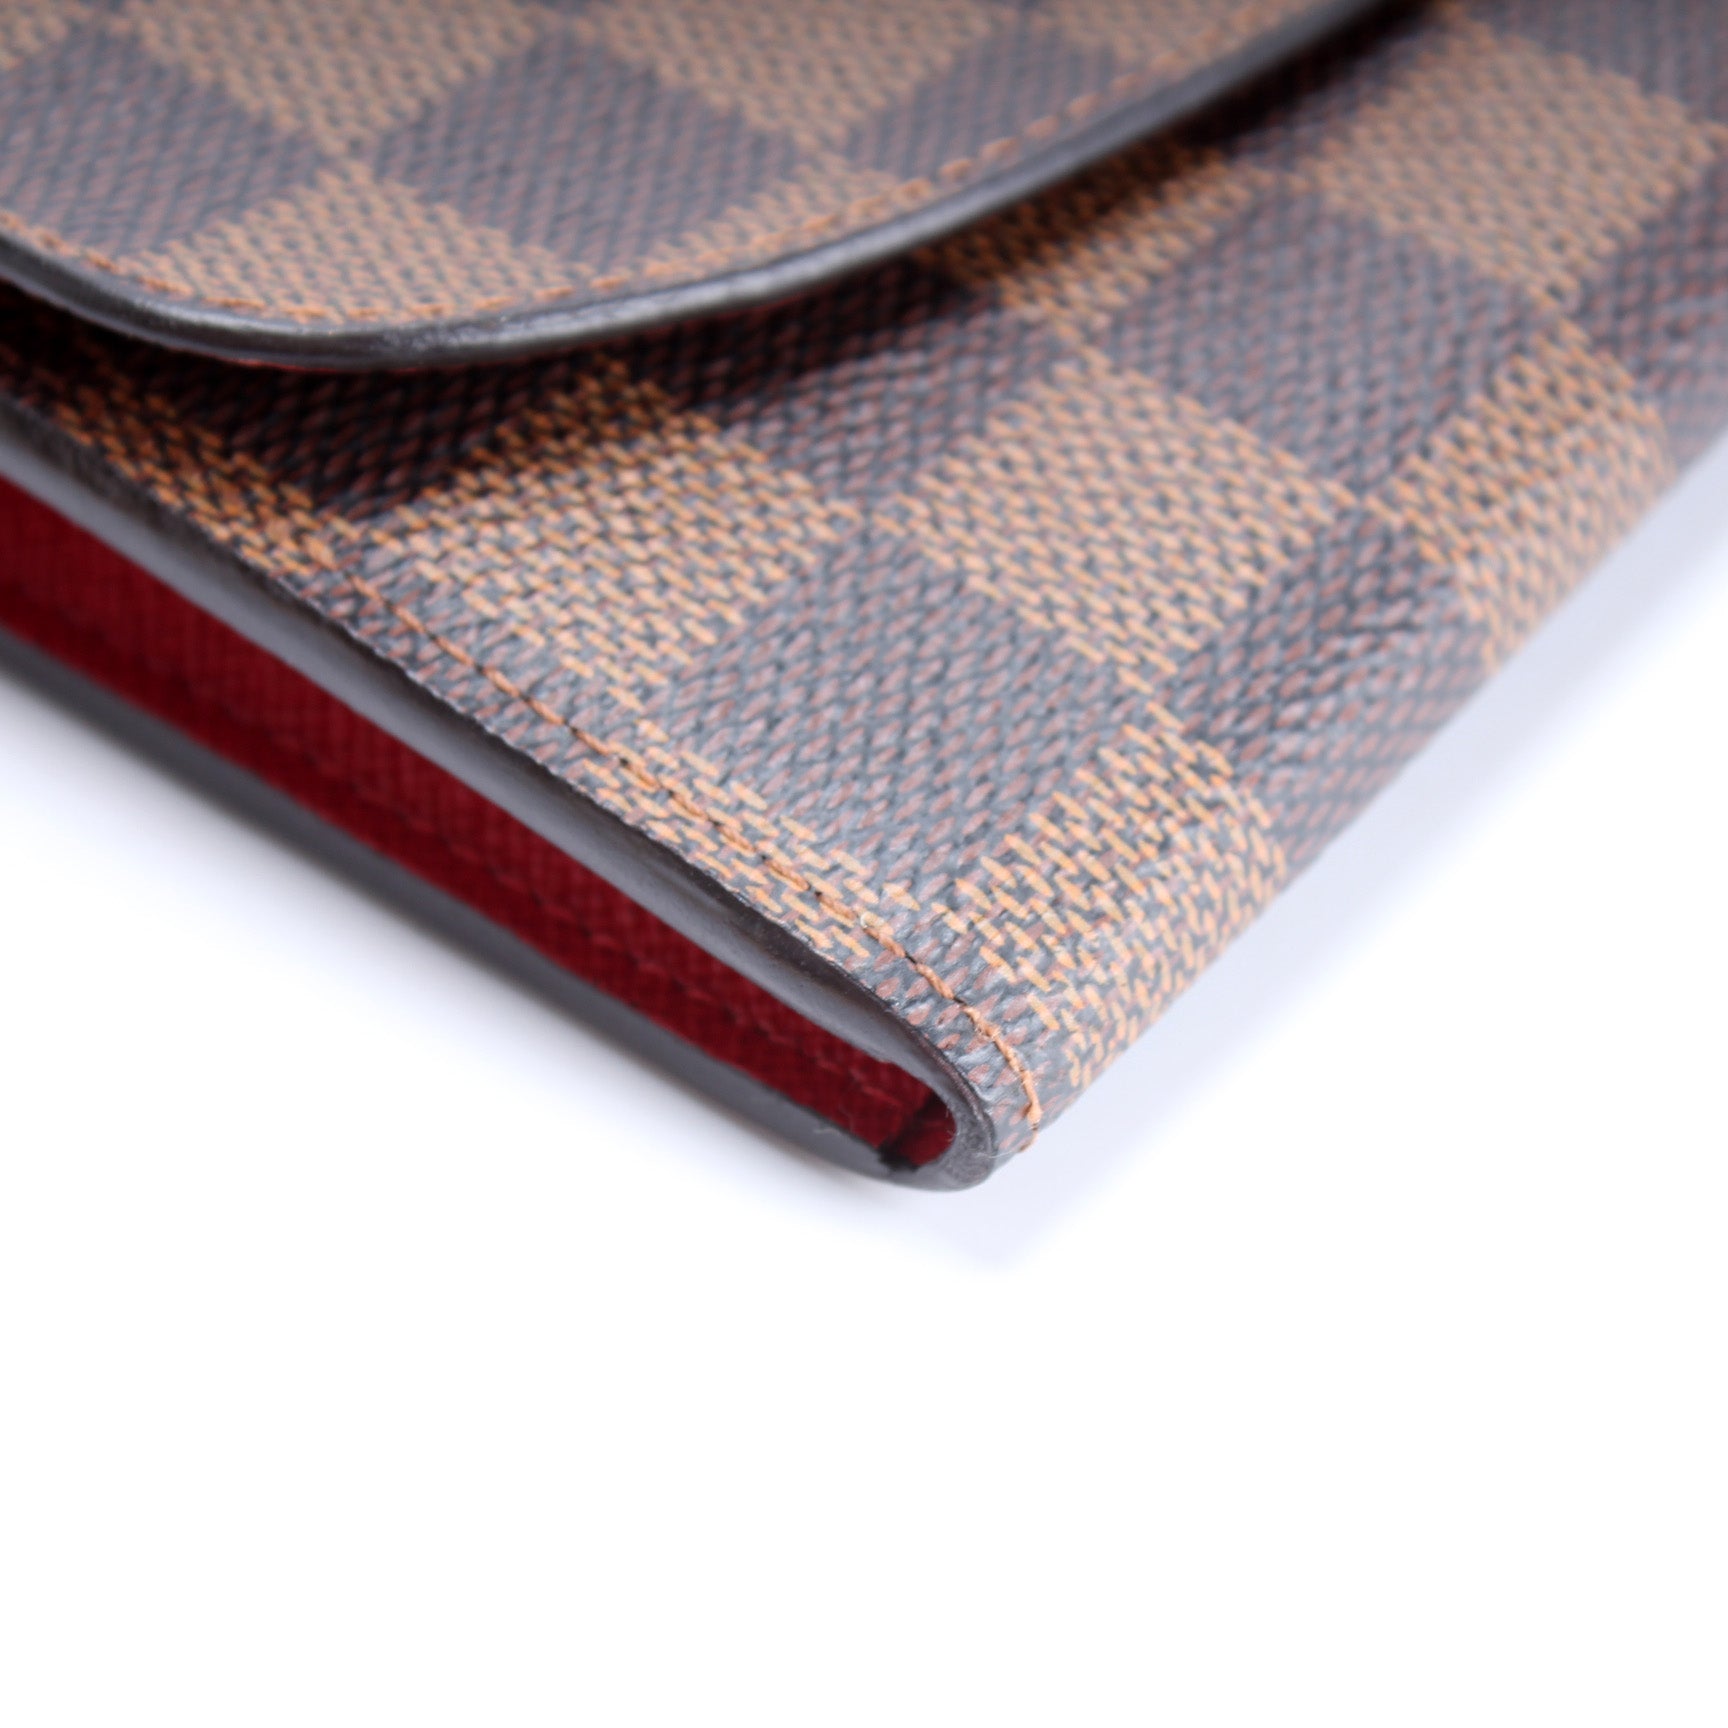 Emilie Wallet Damier Ebene Canvas - Wallets and Small Leather Goods N60214